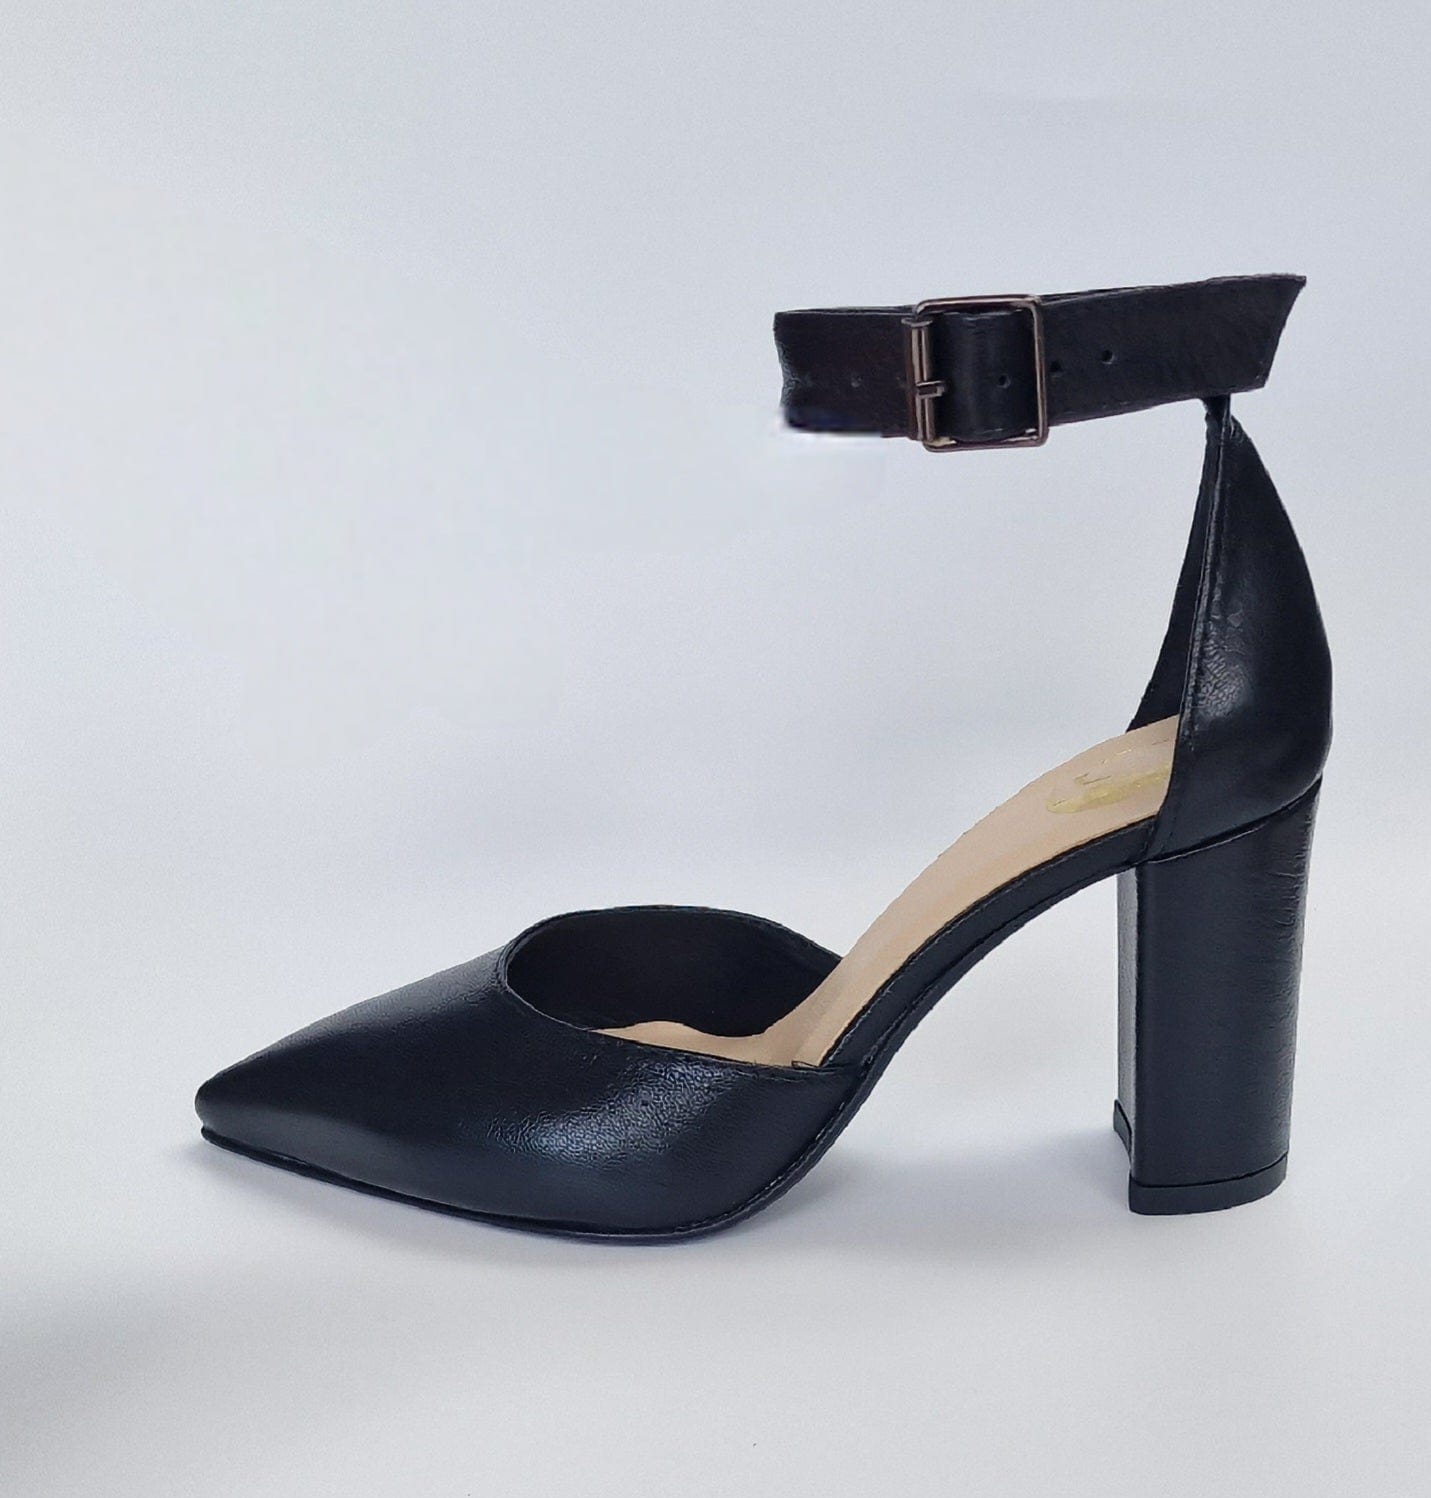 Pointed toe black leather court shoes with ankle strap